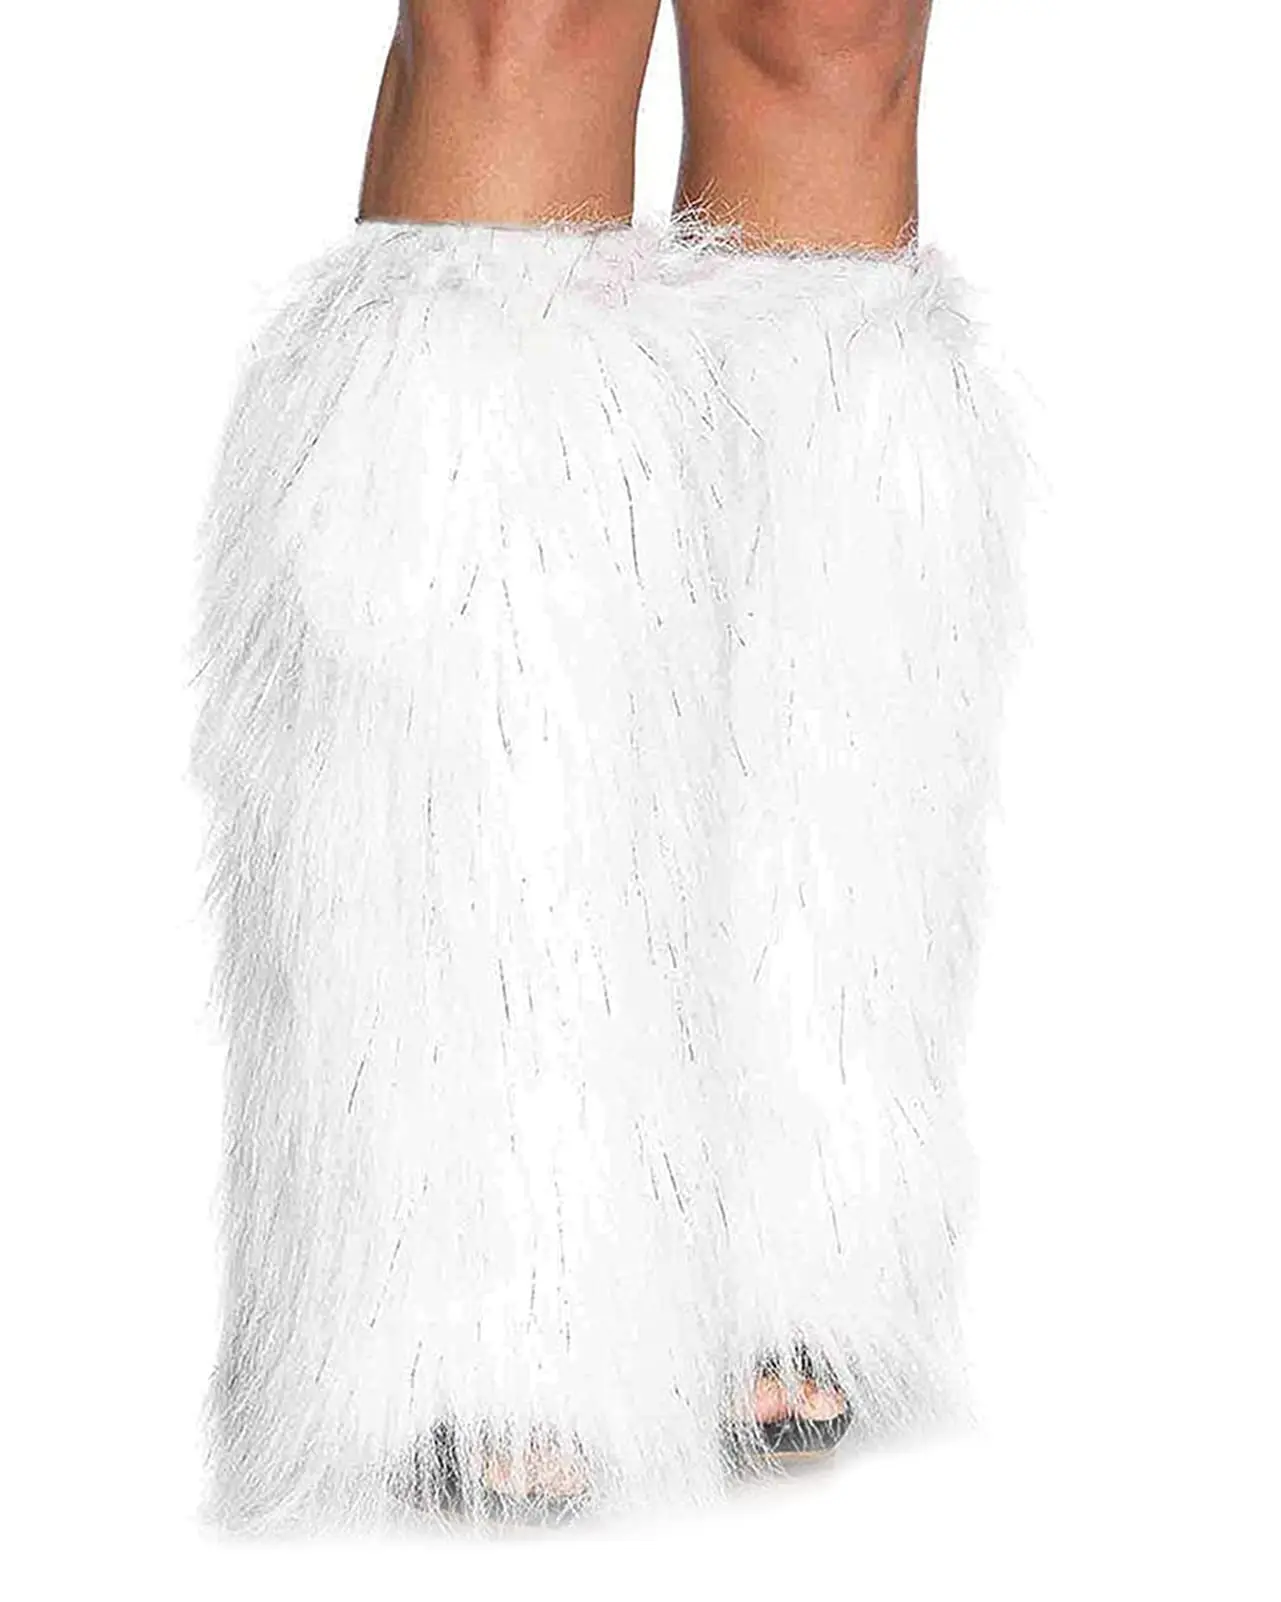 45cm White With Silver Fuzzy Faux Fur Leg Warmers Fur Heels Long Boots Cuff Cover has Elasticity Dionysia Boot cover Carnival